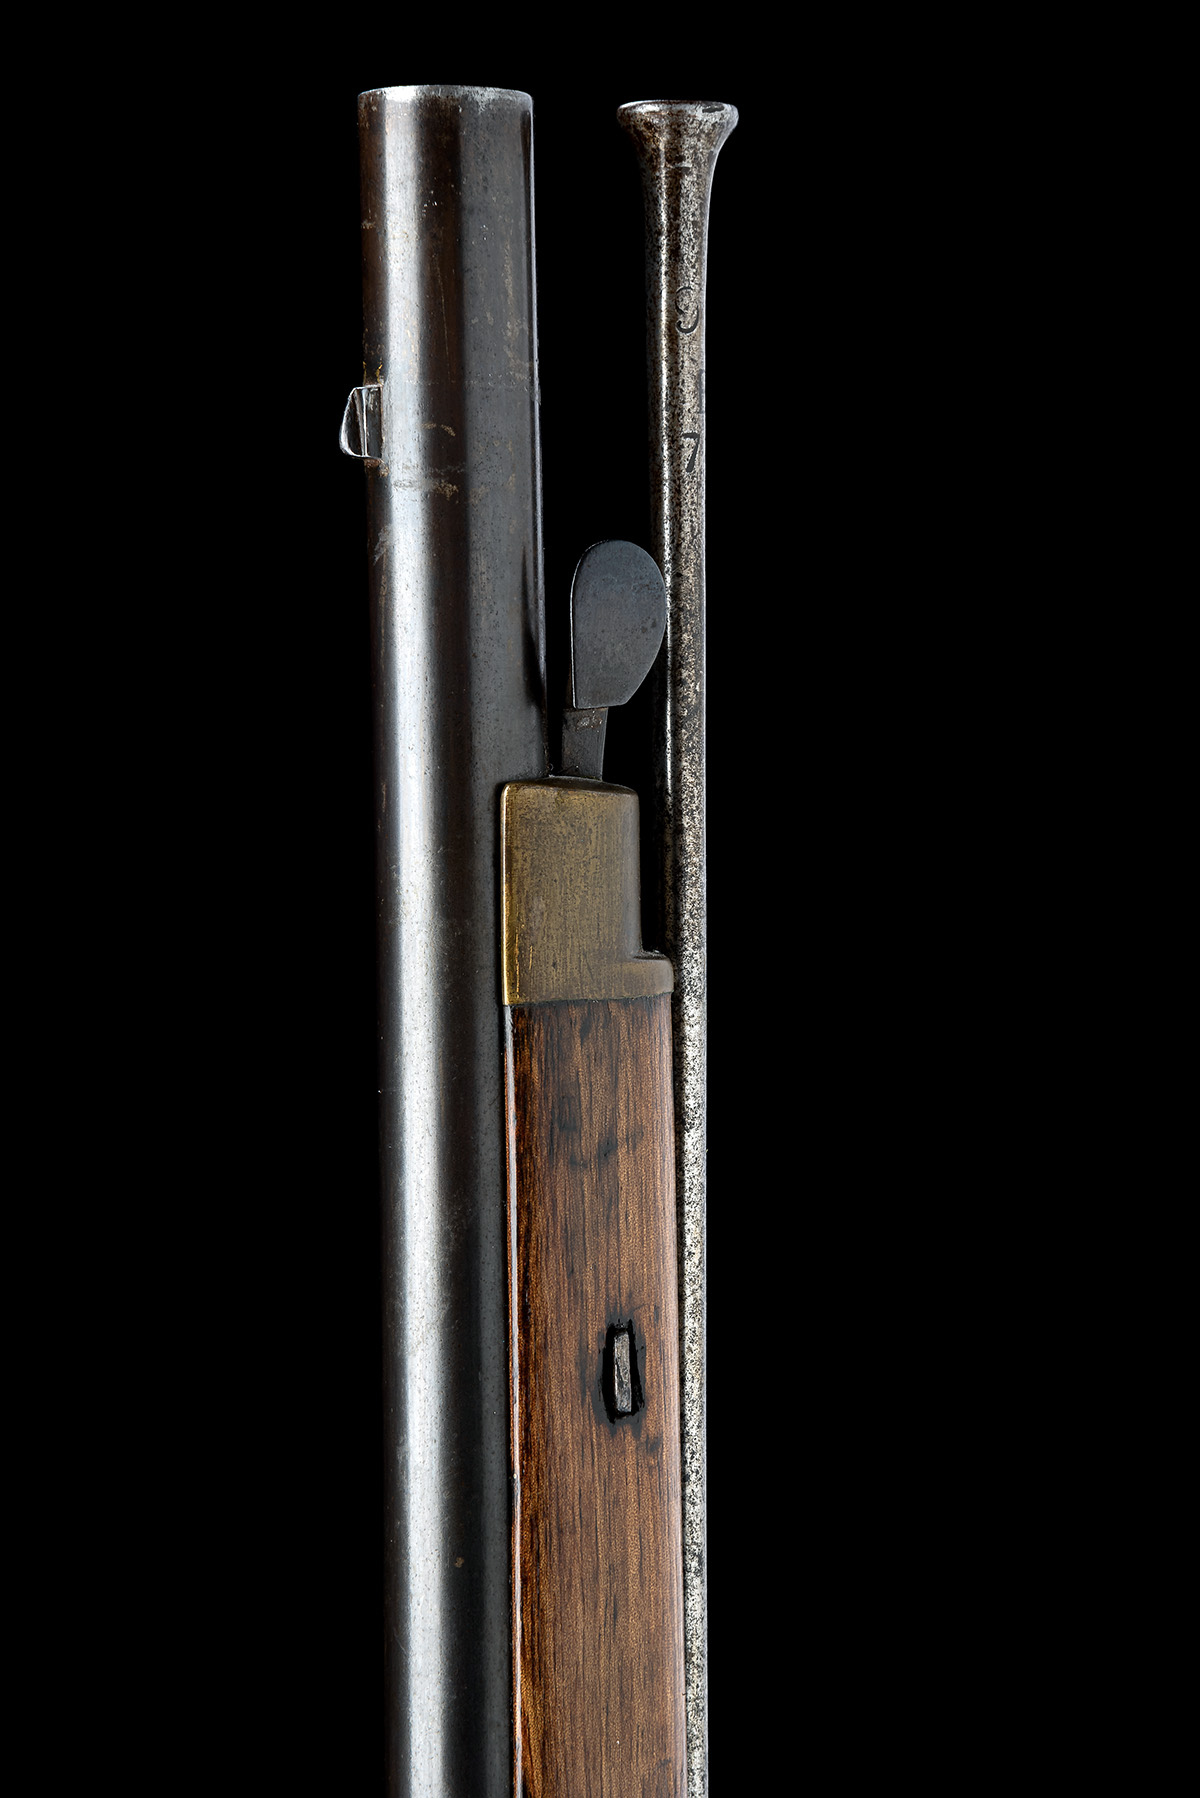 A RARE CRIMEAN WAR .704 PATTERN 1851 PERCUSSION RIFLE MUSKET MARKED TO THE 1ST BATTALION - Image 10 of 10